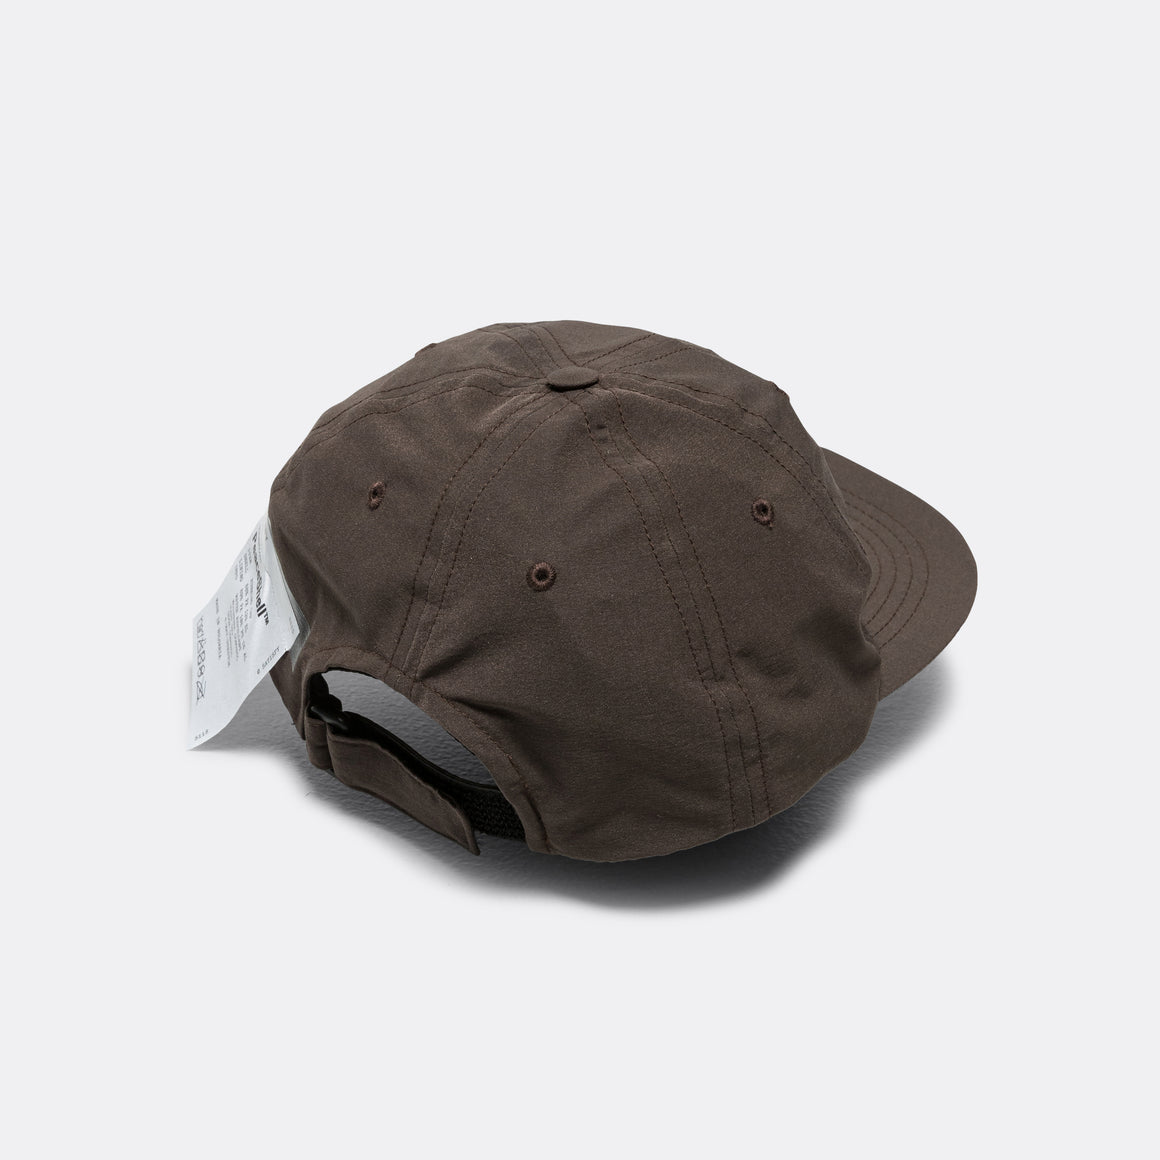 Satisfy - Peaceshell™ Running Cap - Brown - Up There Athletics